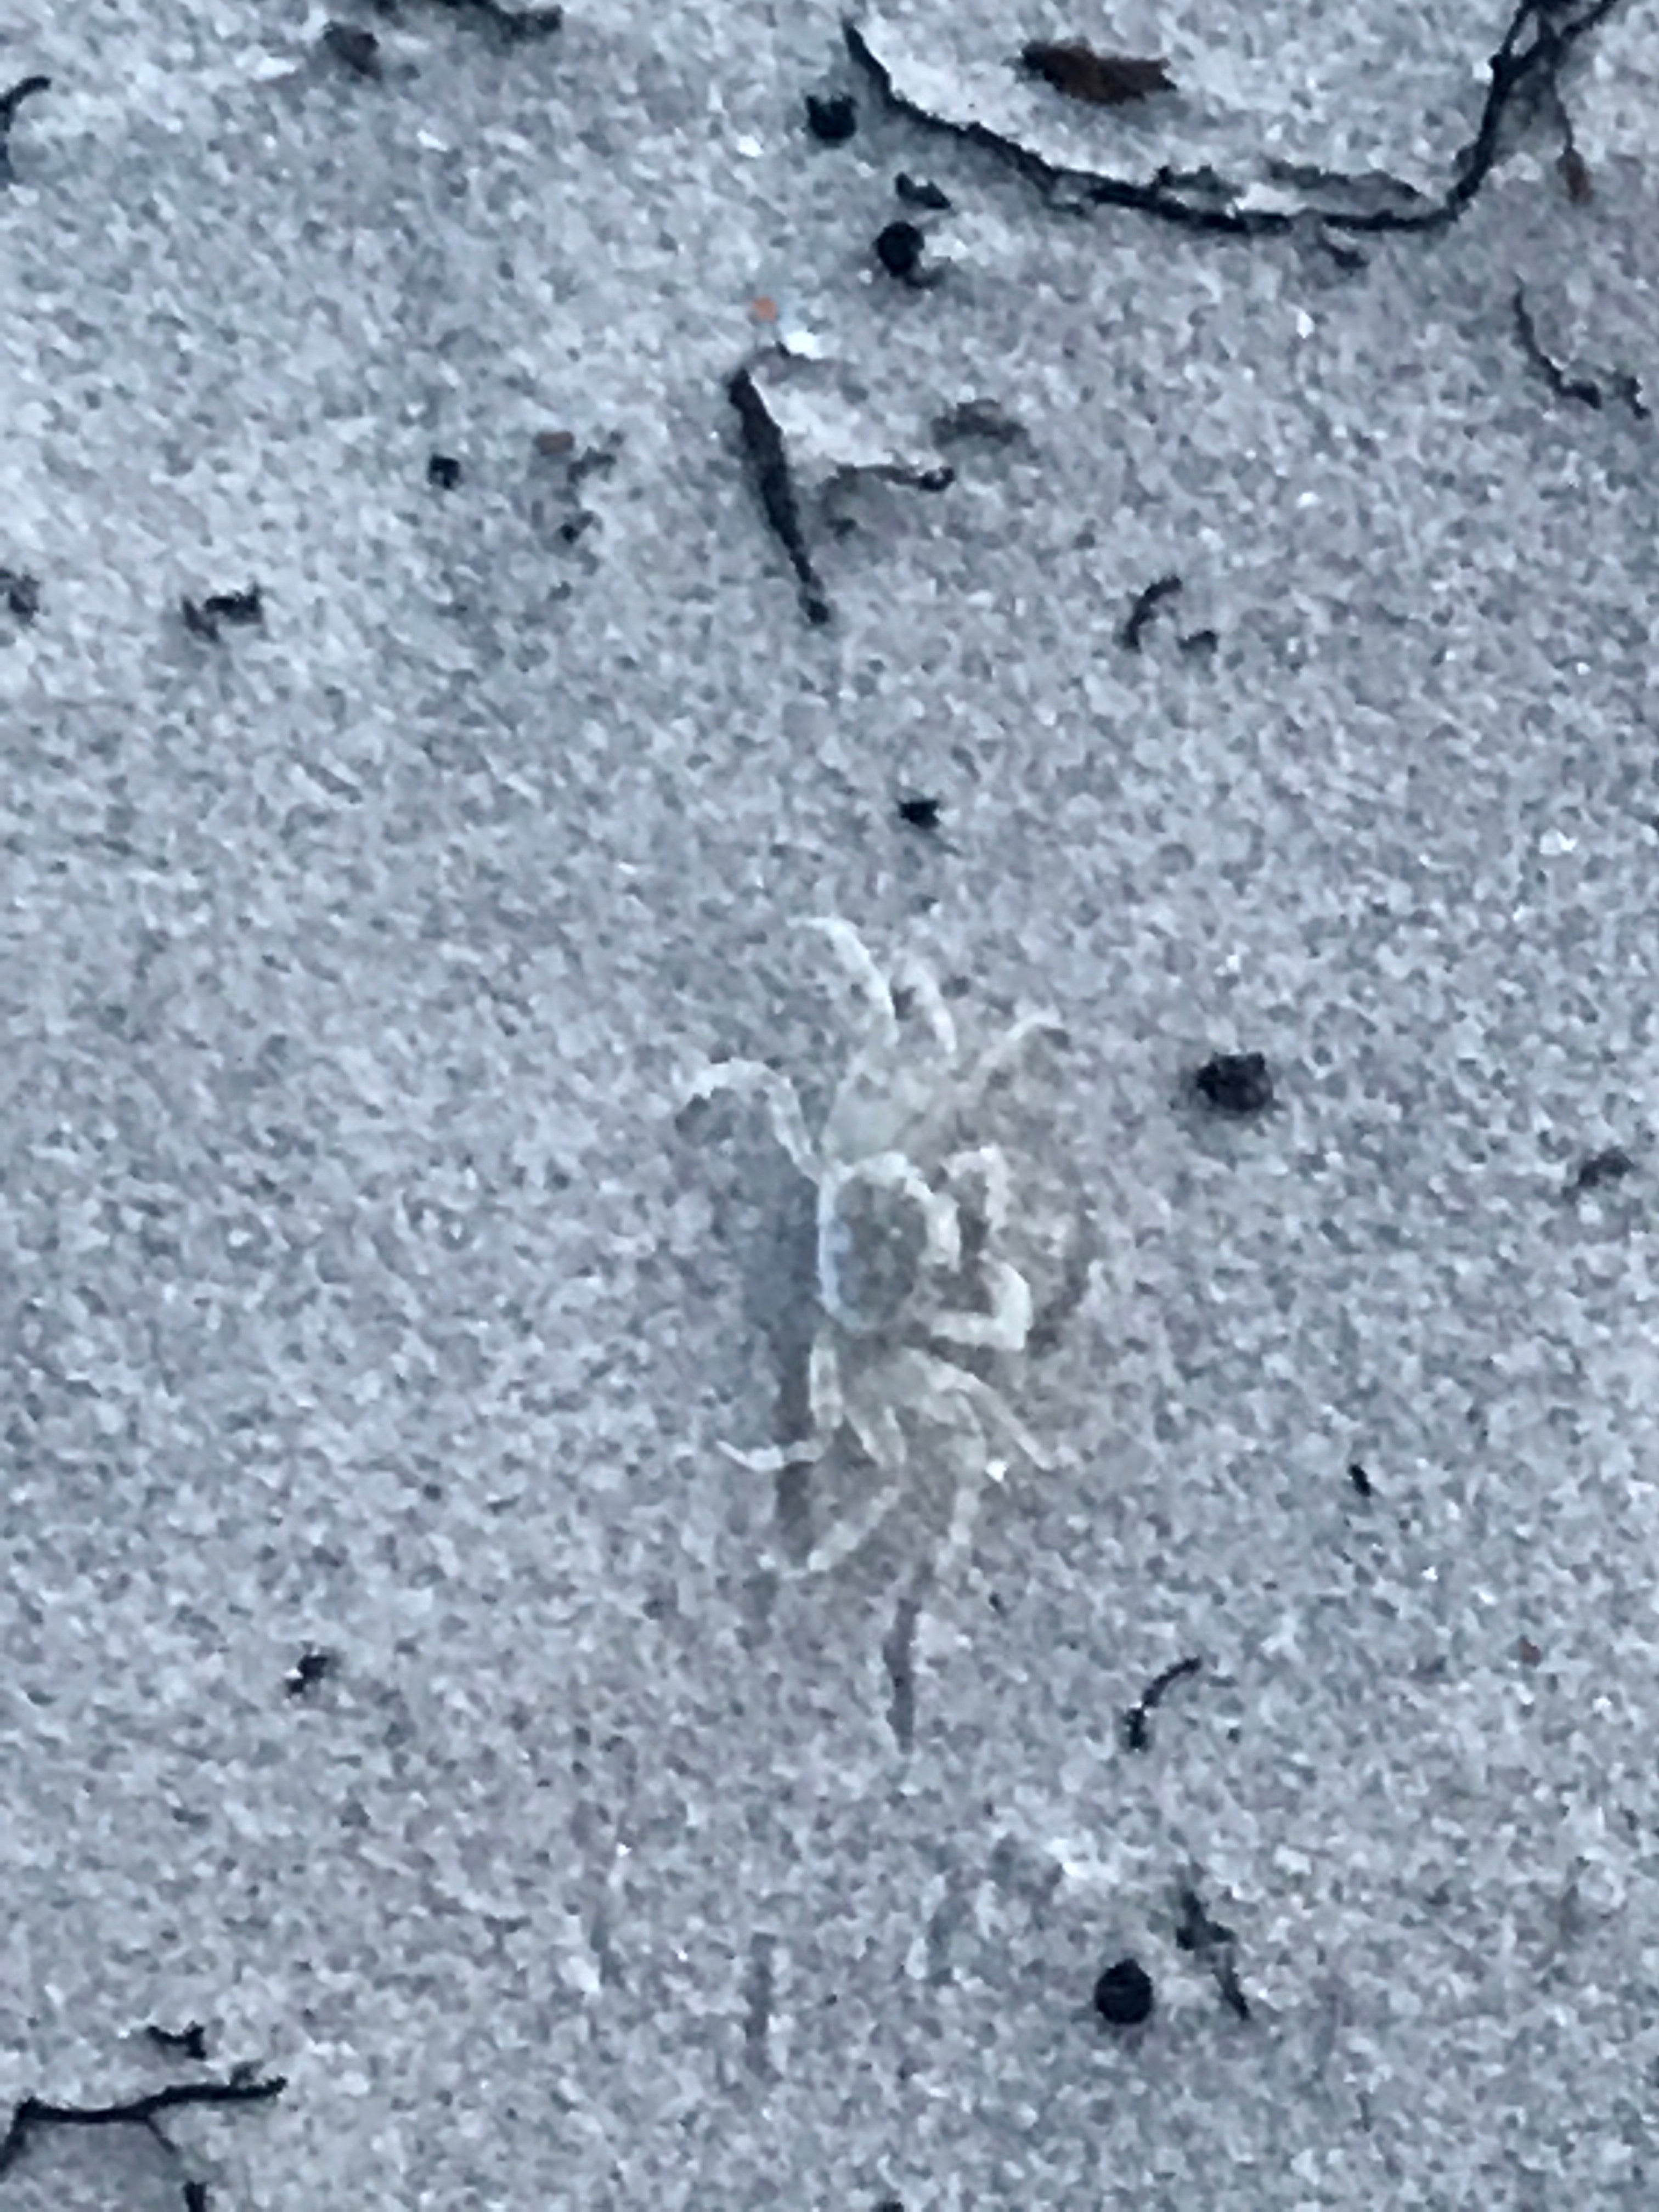 These little near transparent crabs are everywhere on the beach and make little holes.  If you watch long enough you will see them dig and create a new world to hide through the heat of the day.